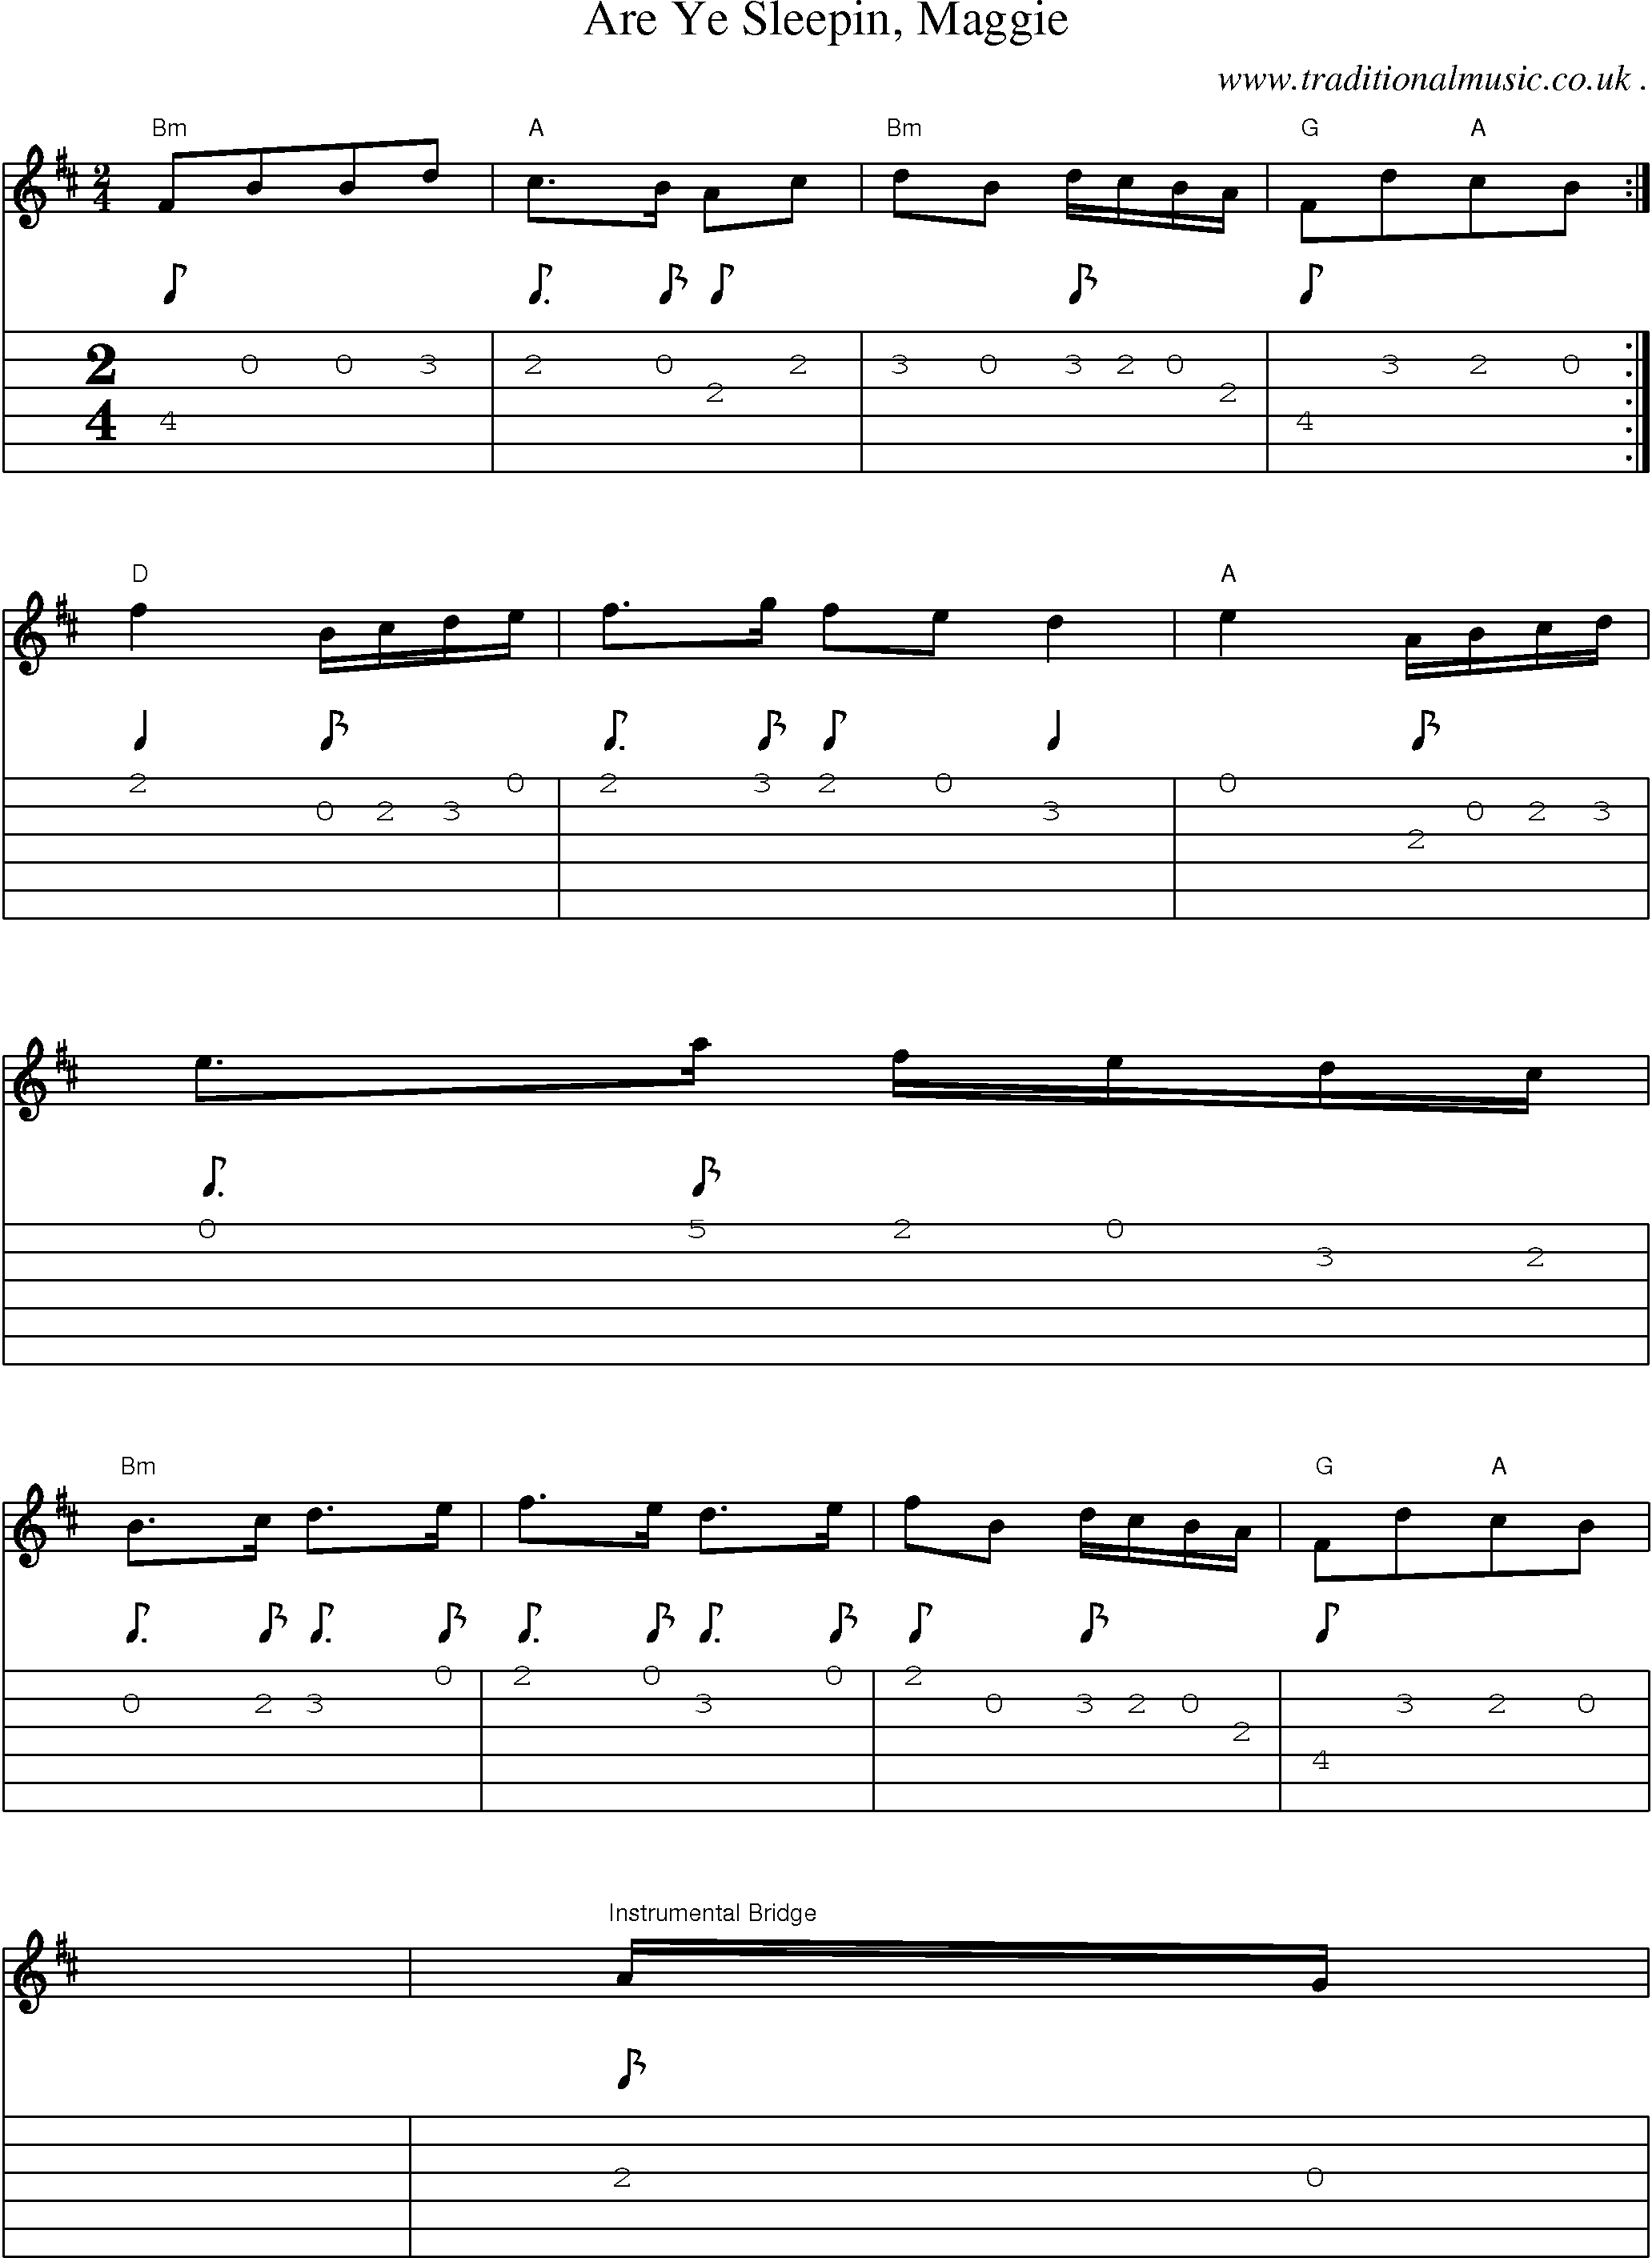 Sheet-Music and Guitar Tabs for Are Ye Sleepin Maggie